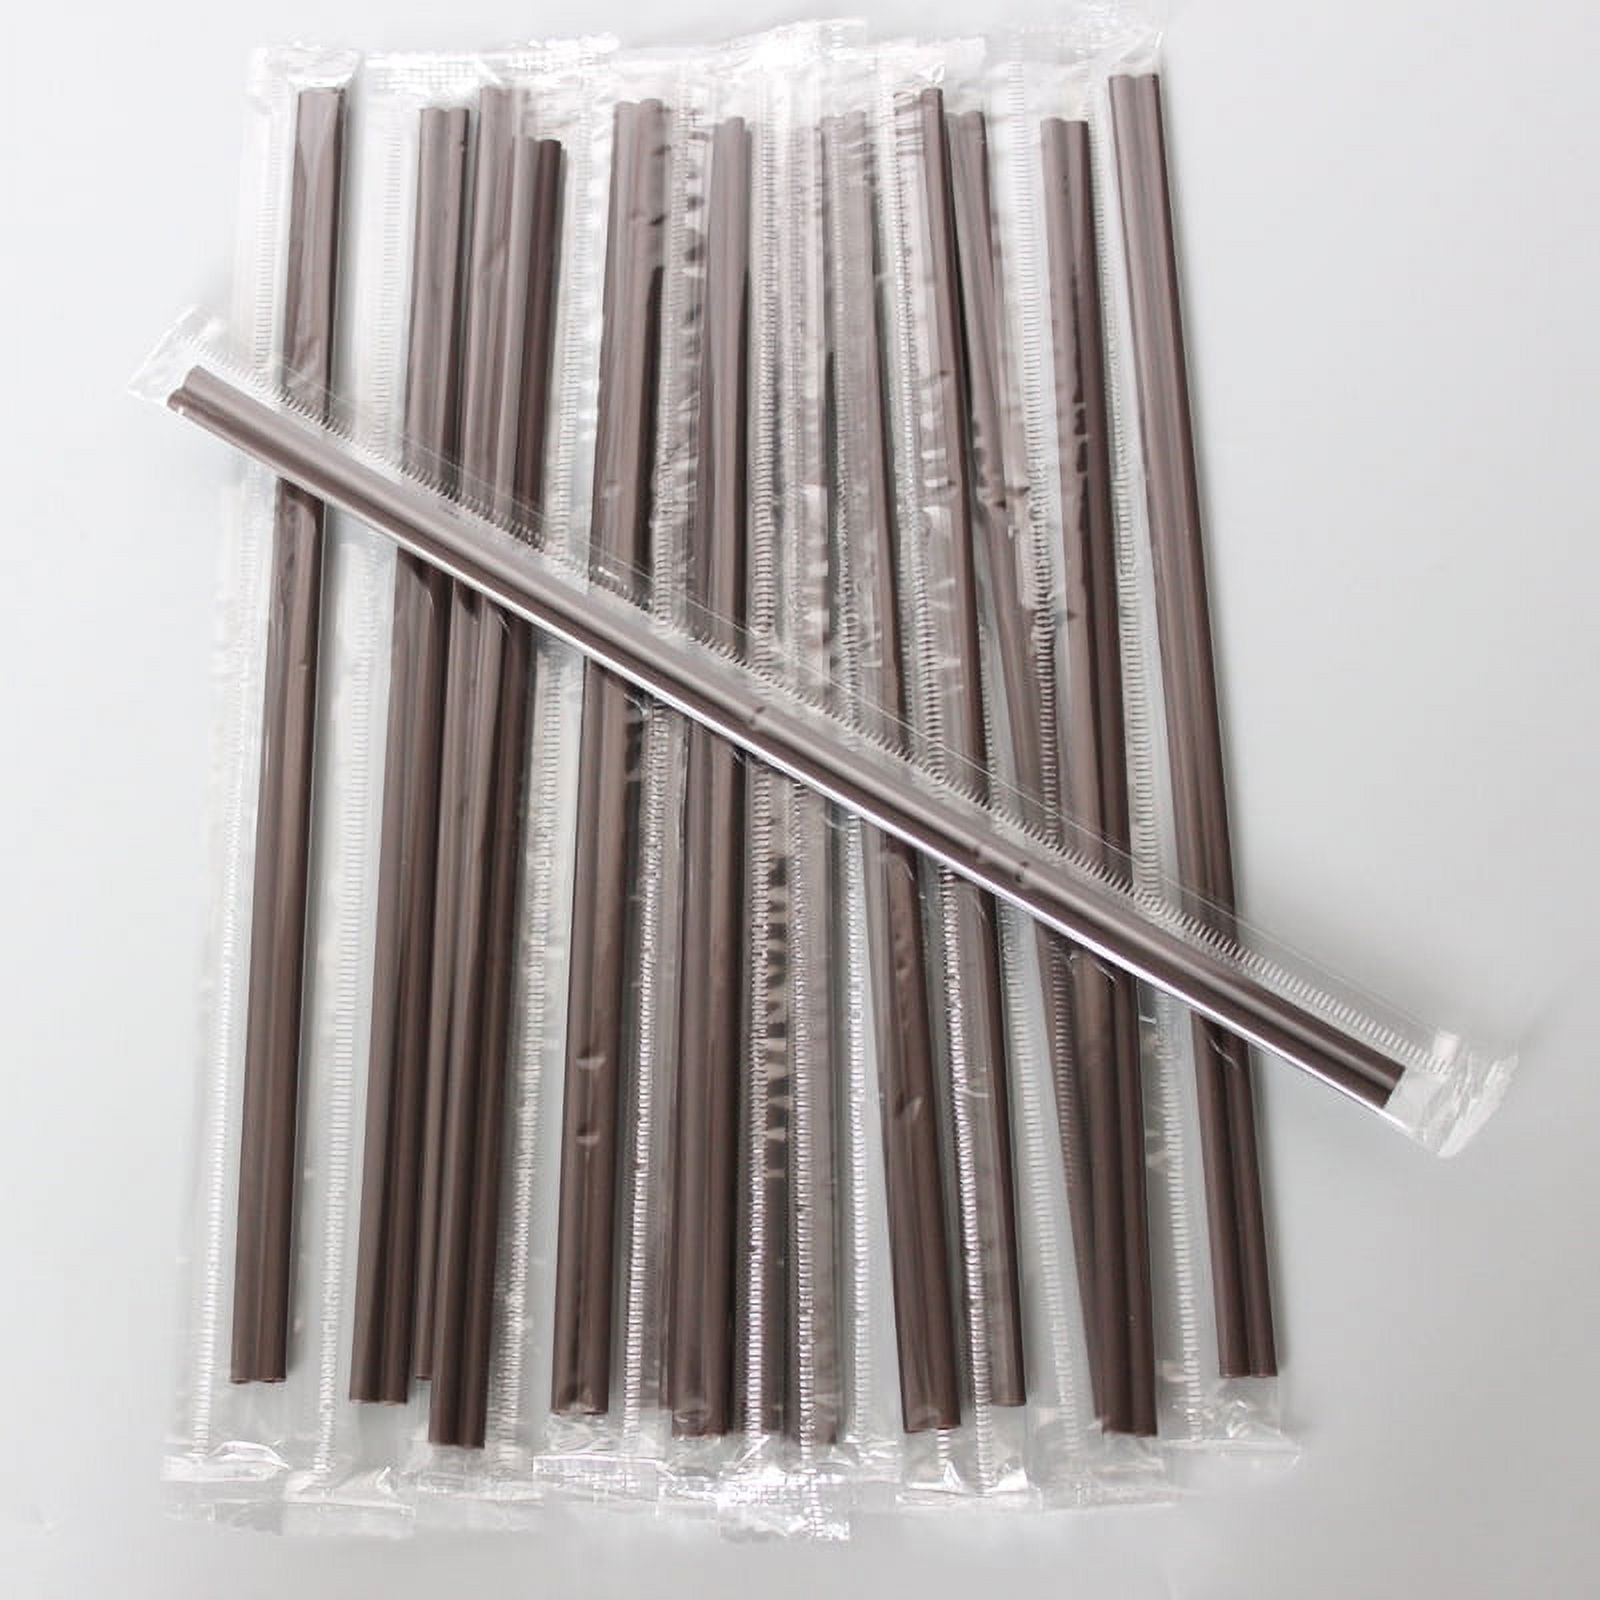 Disposable Coffee Straw Stir Sticks, 7 inches Sip Straw, 50 Pcs Coffee  Stirrers Individually Wrapped,Cocktail Straws & Stirrers by Casewin,Plastic